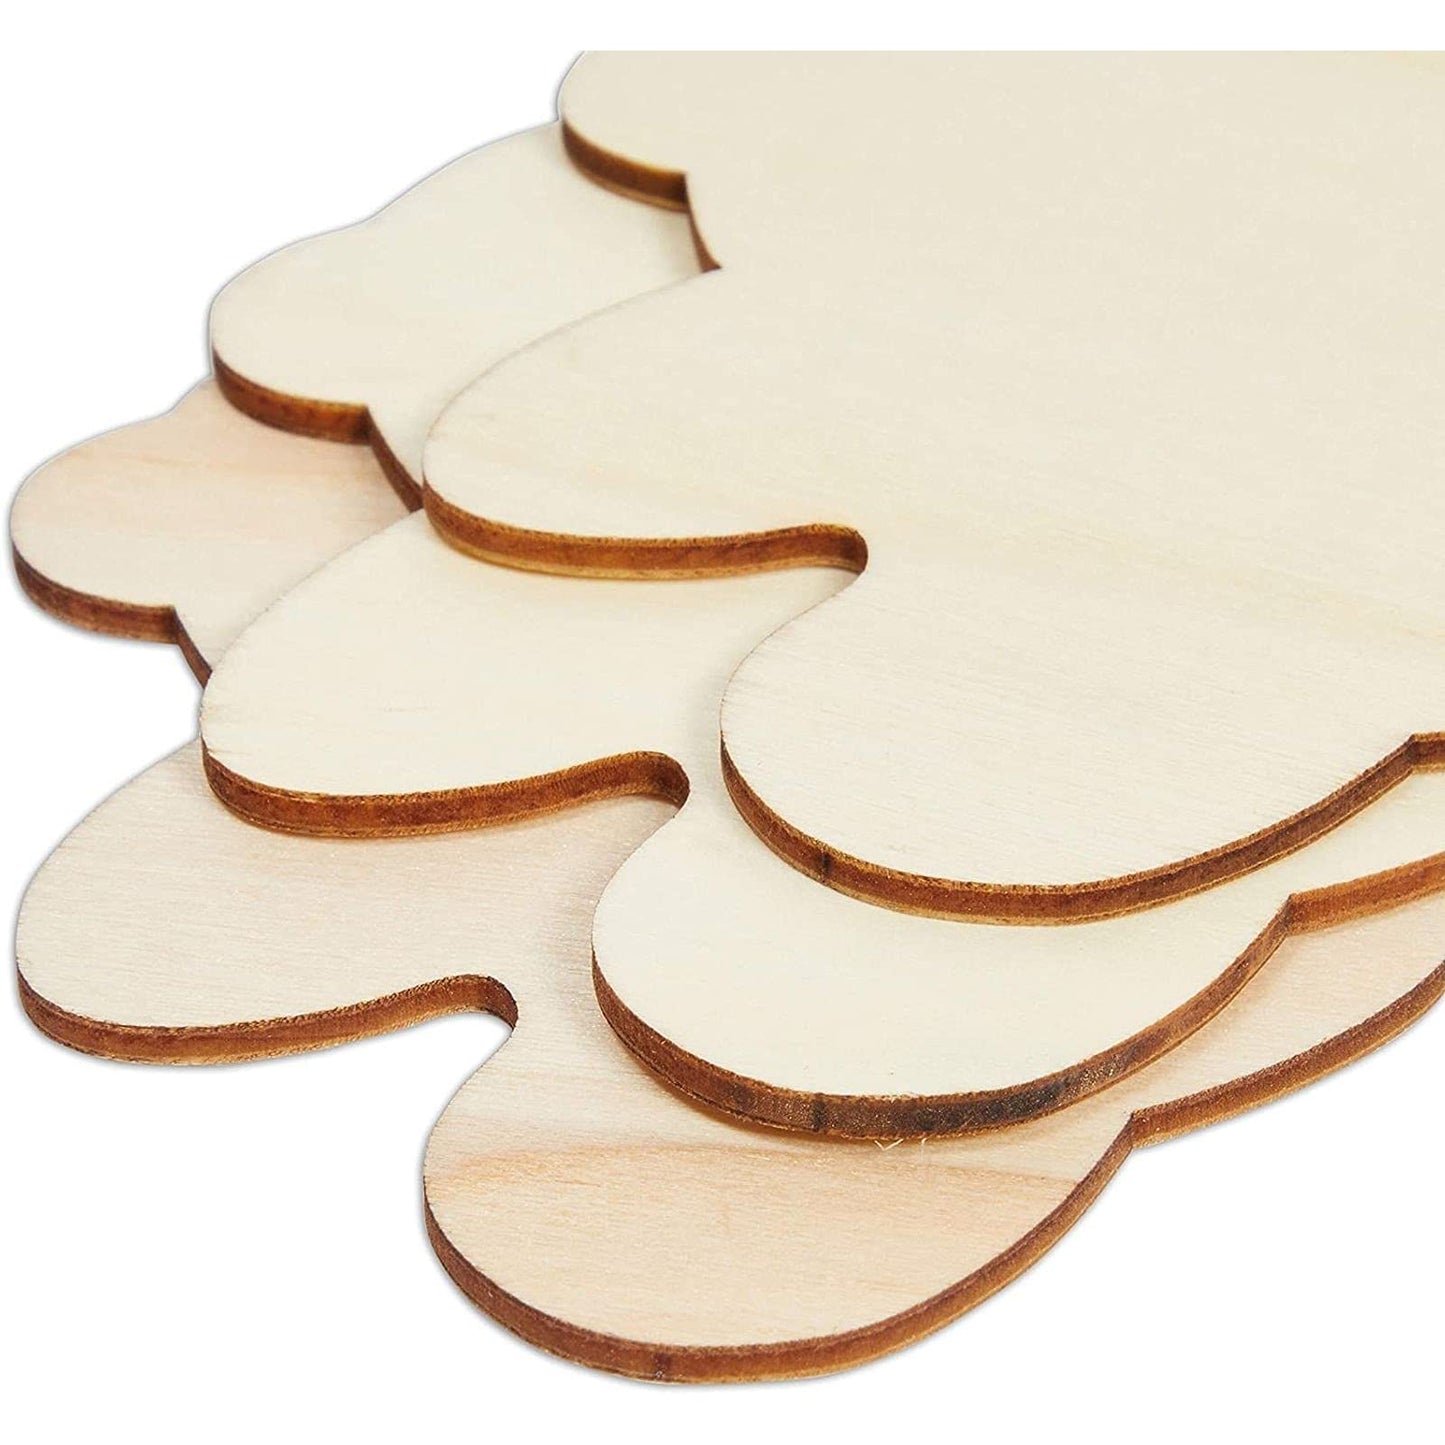 24 Pack Wooden Teddy Bear Cutouts for Crafts, Unfinished Wood Pieces for DIY Projects (3.7 x 3.5 in)